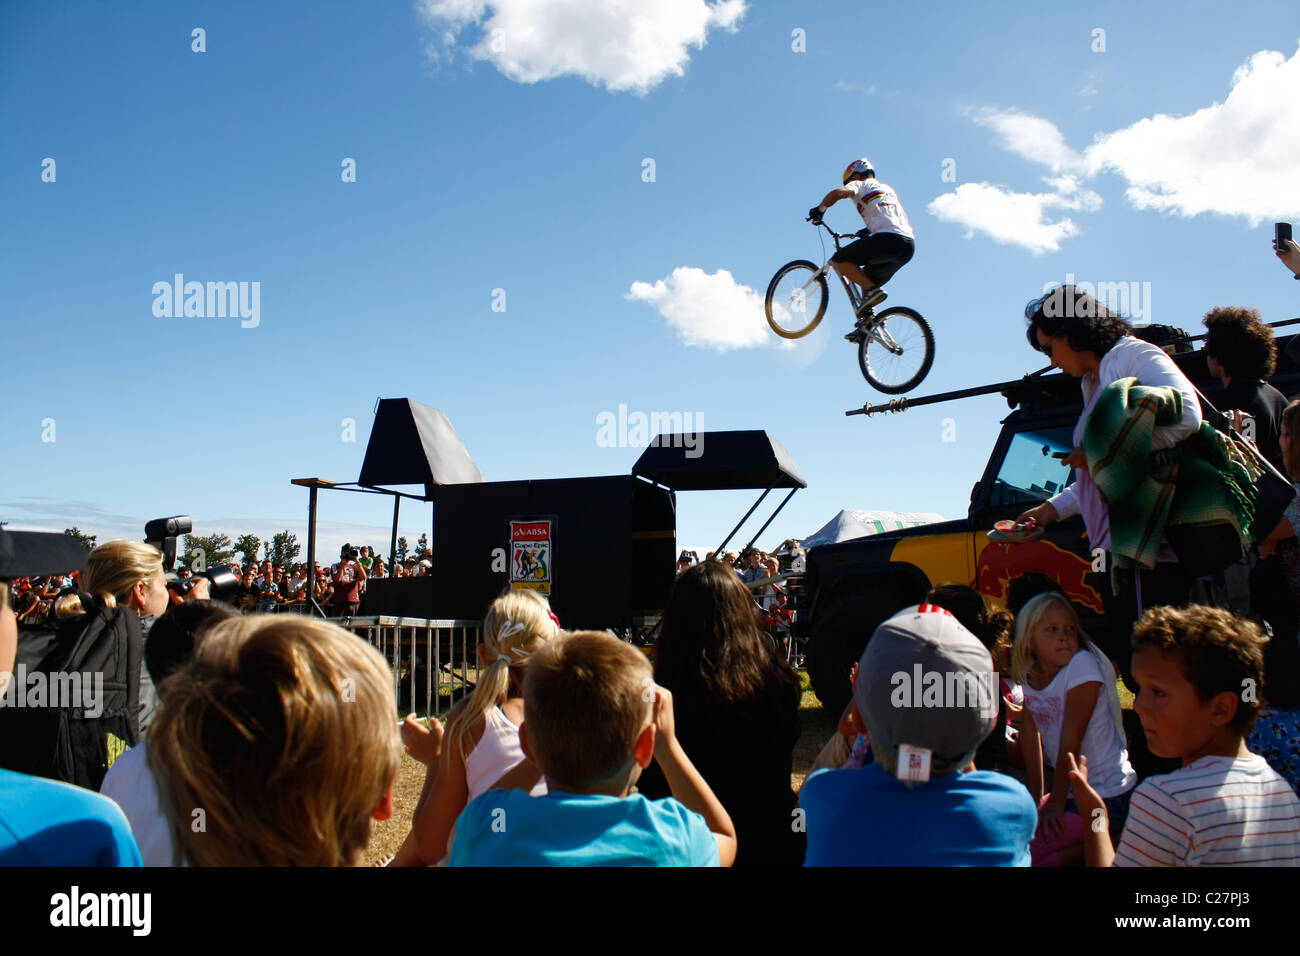 Red Bull Champion Rider Jumps From car approximately 2.5 meters to trailer and makes perfect landing. Photo: Darryl Putter Stock Photo